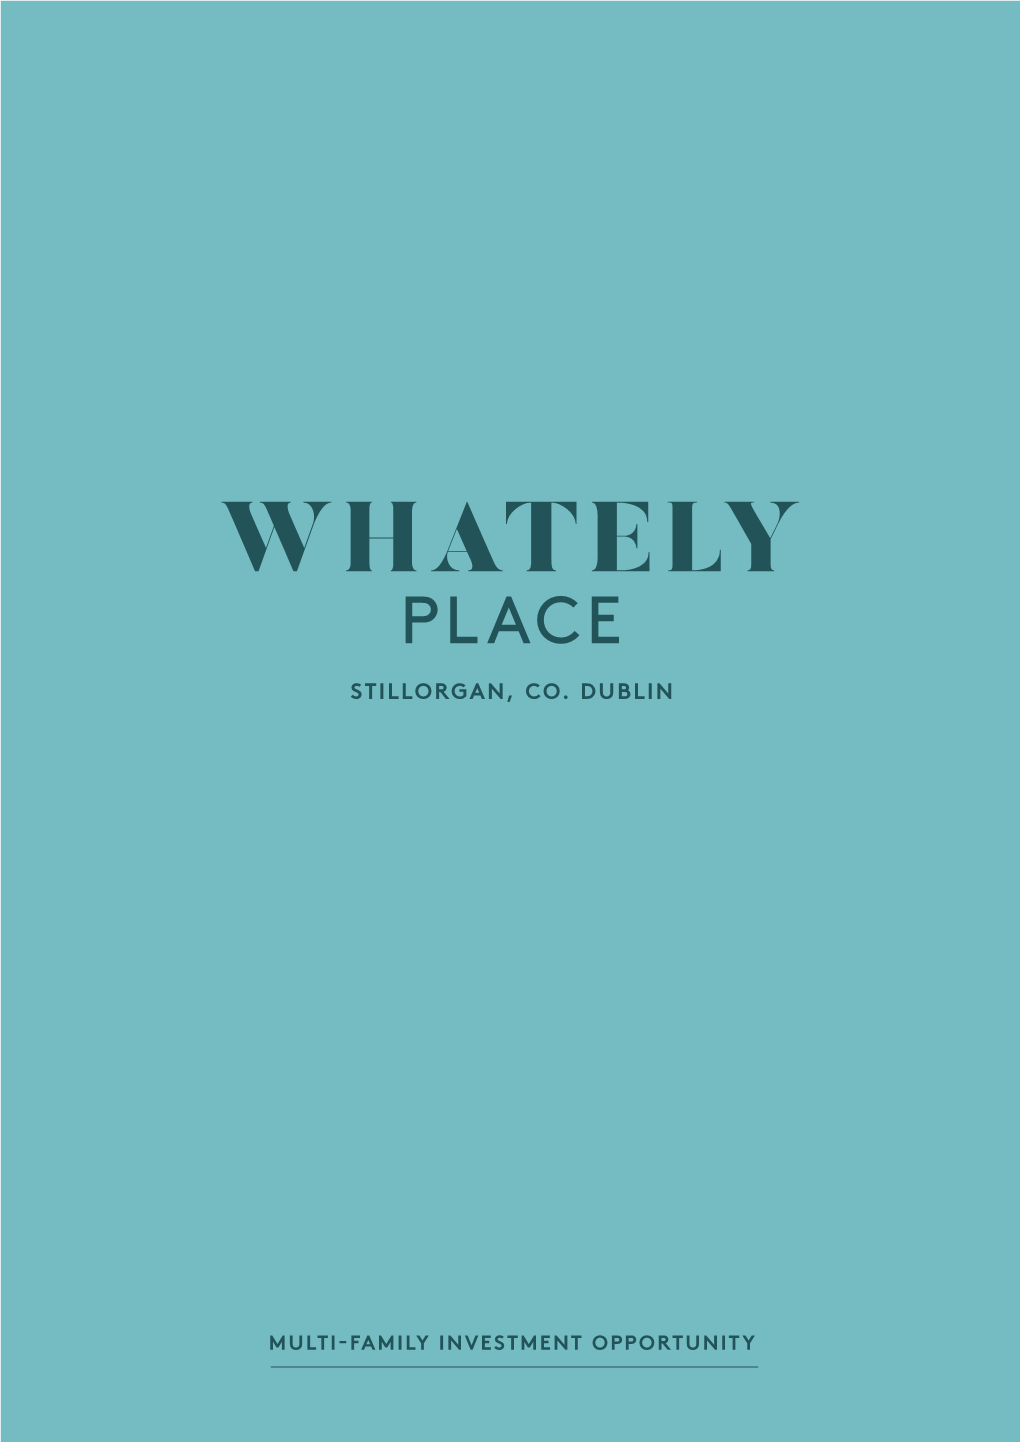 Whately Place Development